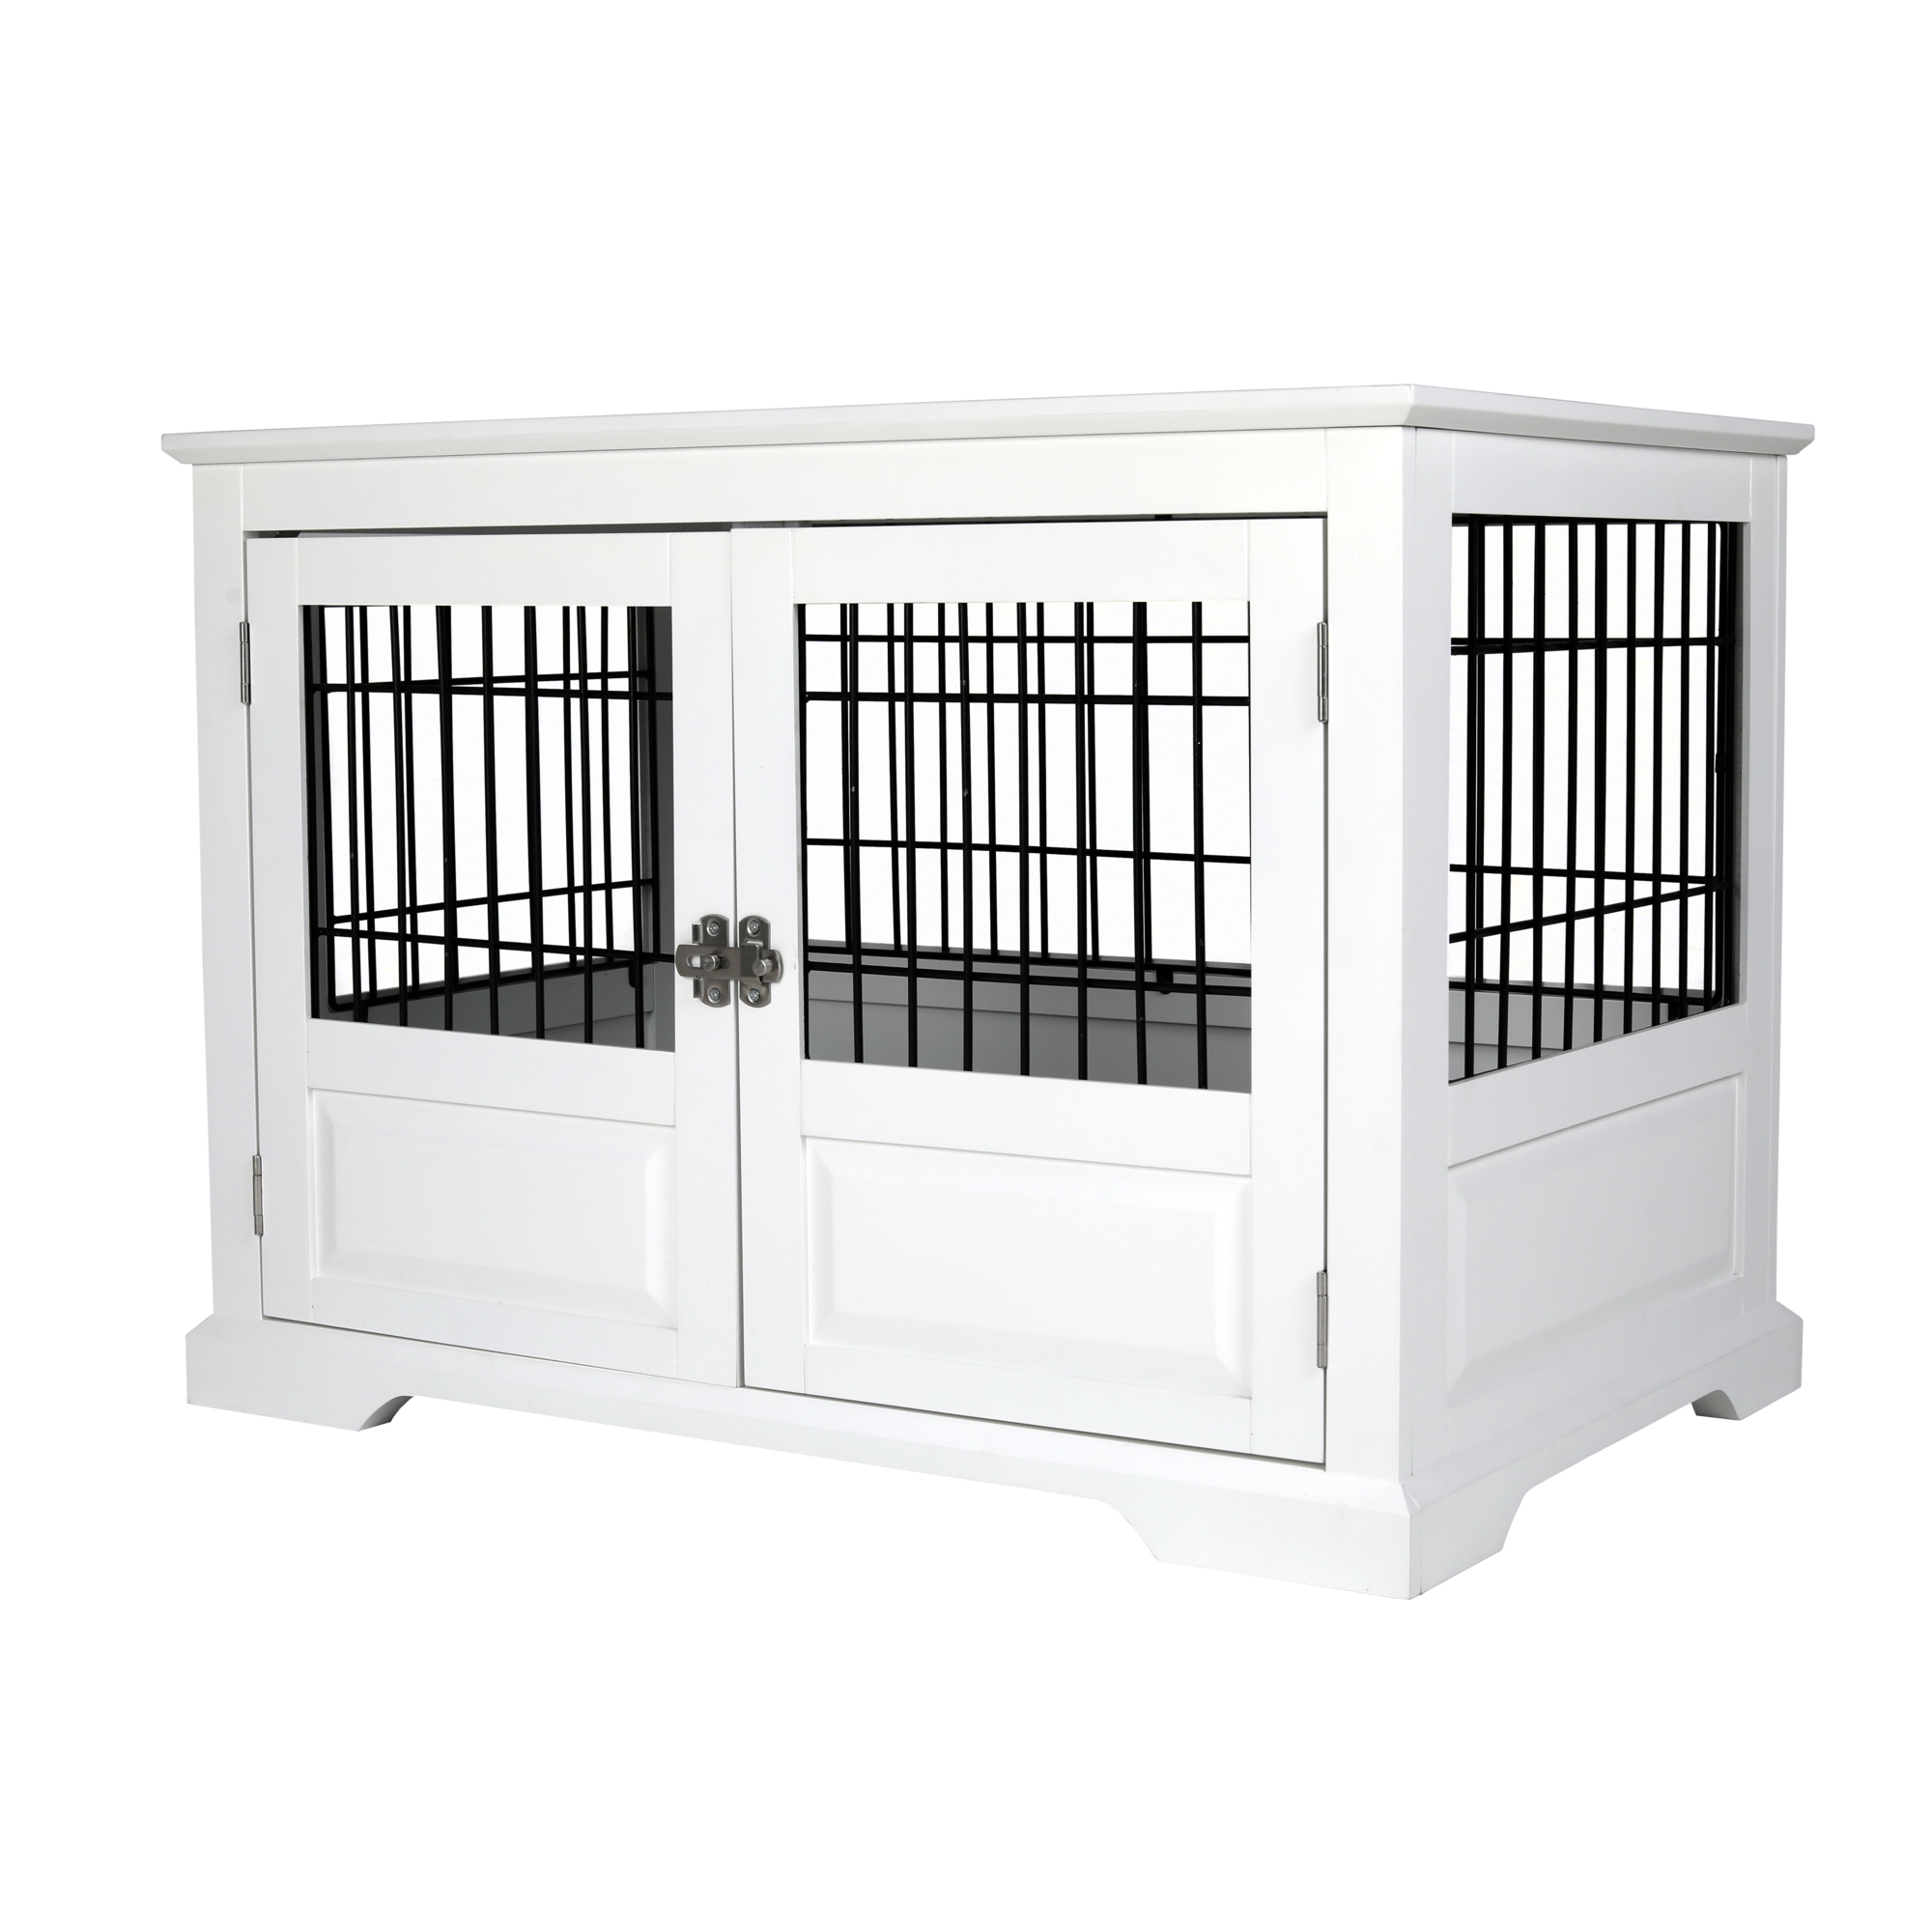 Merry Products, Fairview Triple Door Crate, Large, White, Model PTH1072020100